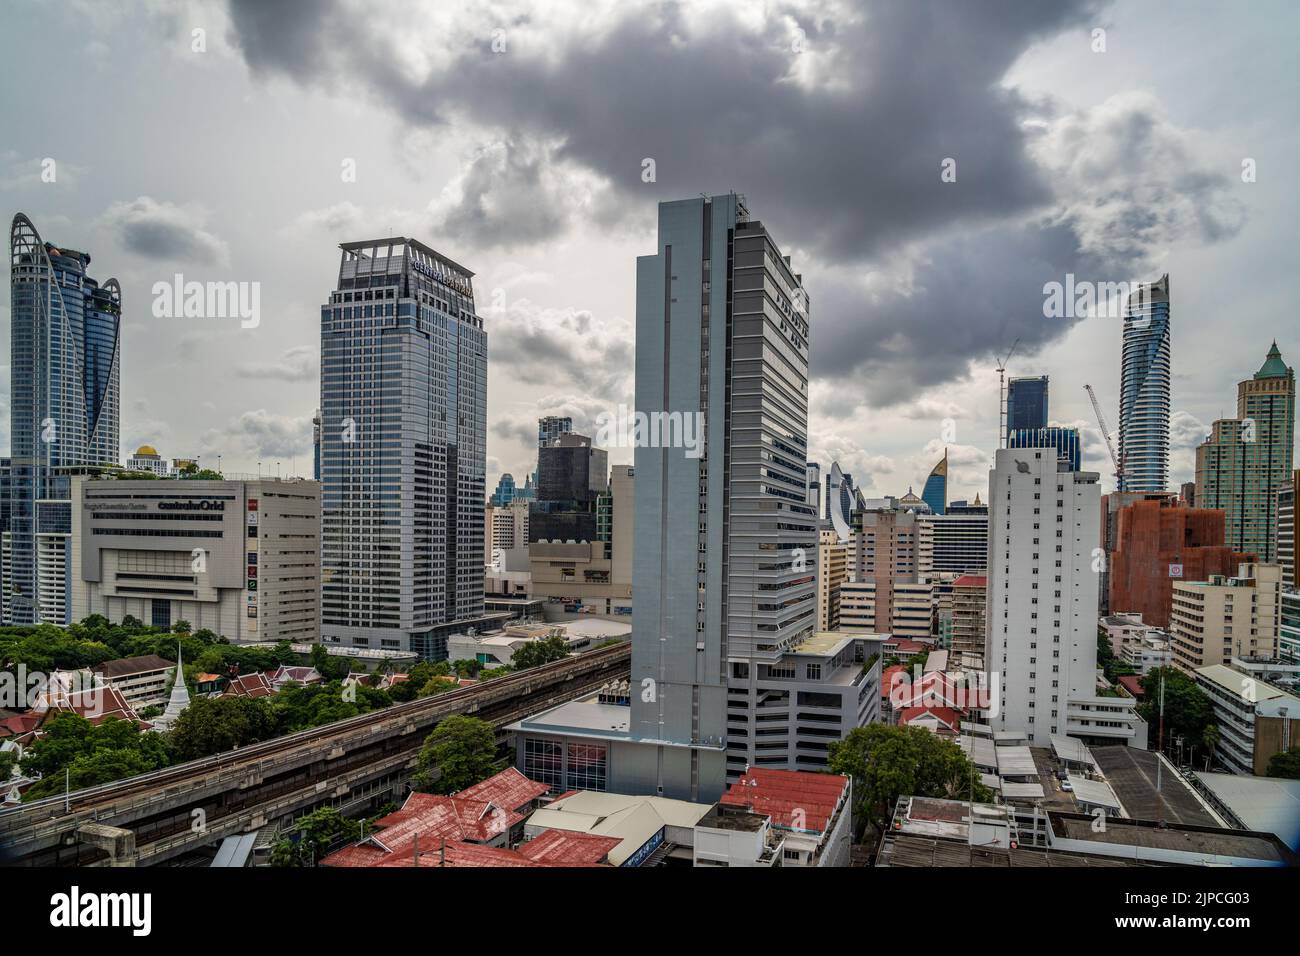 Bangkok, Thailand - 12 August 2022 - Aerial view of Bangkok cityscape showing high-rises and running BTS skytrains with cloudy blue sky Stock Photo